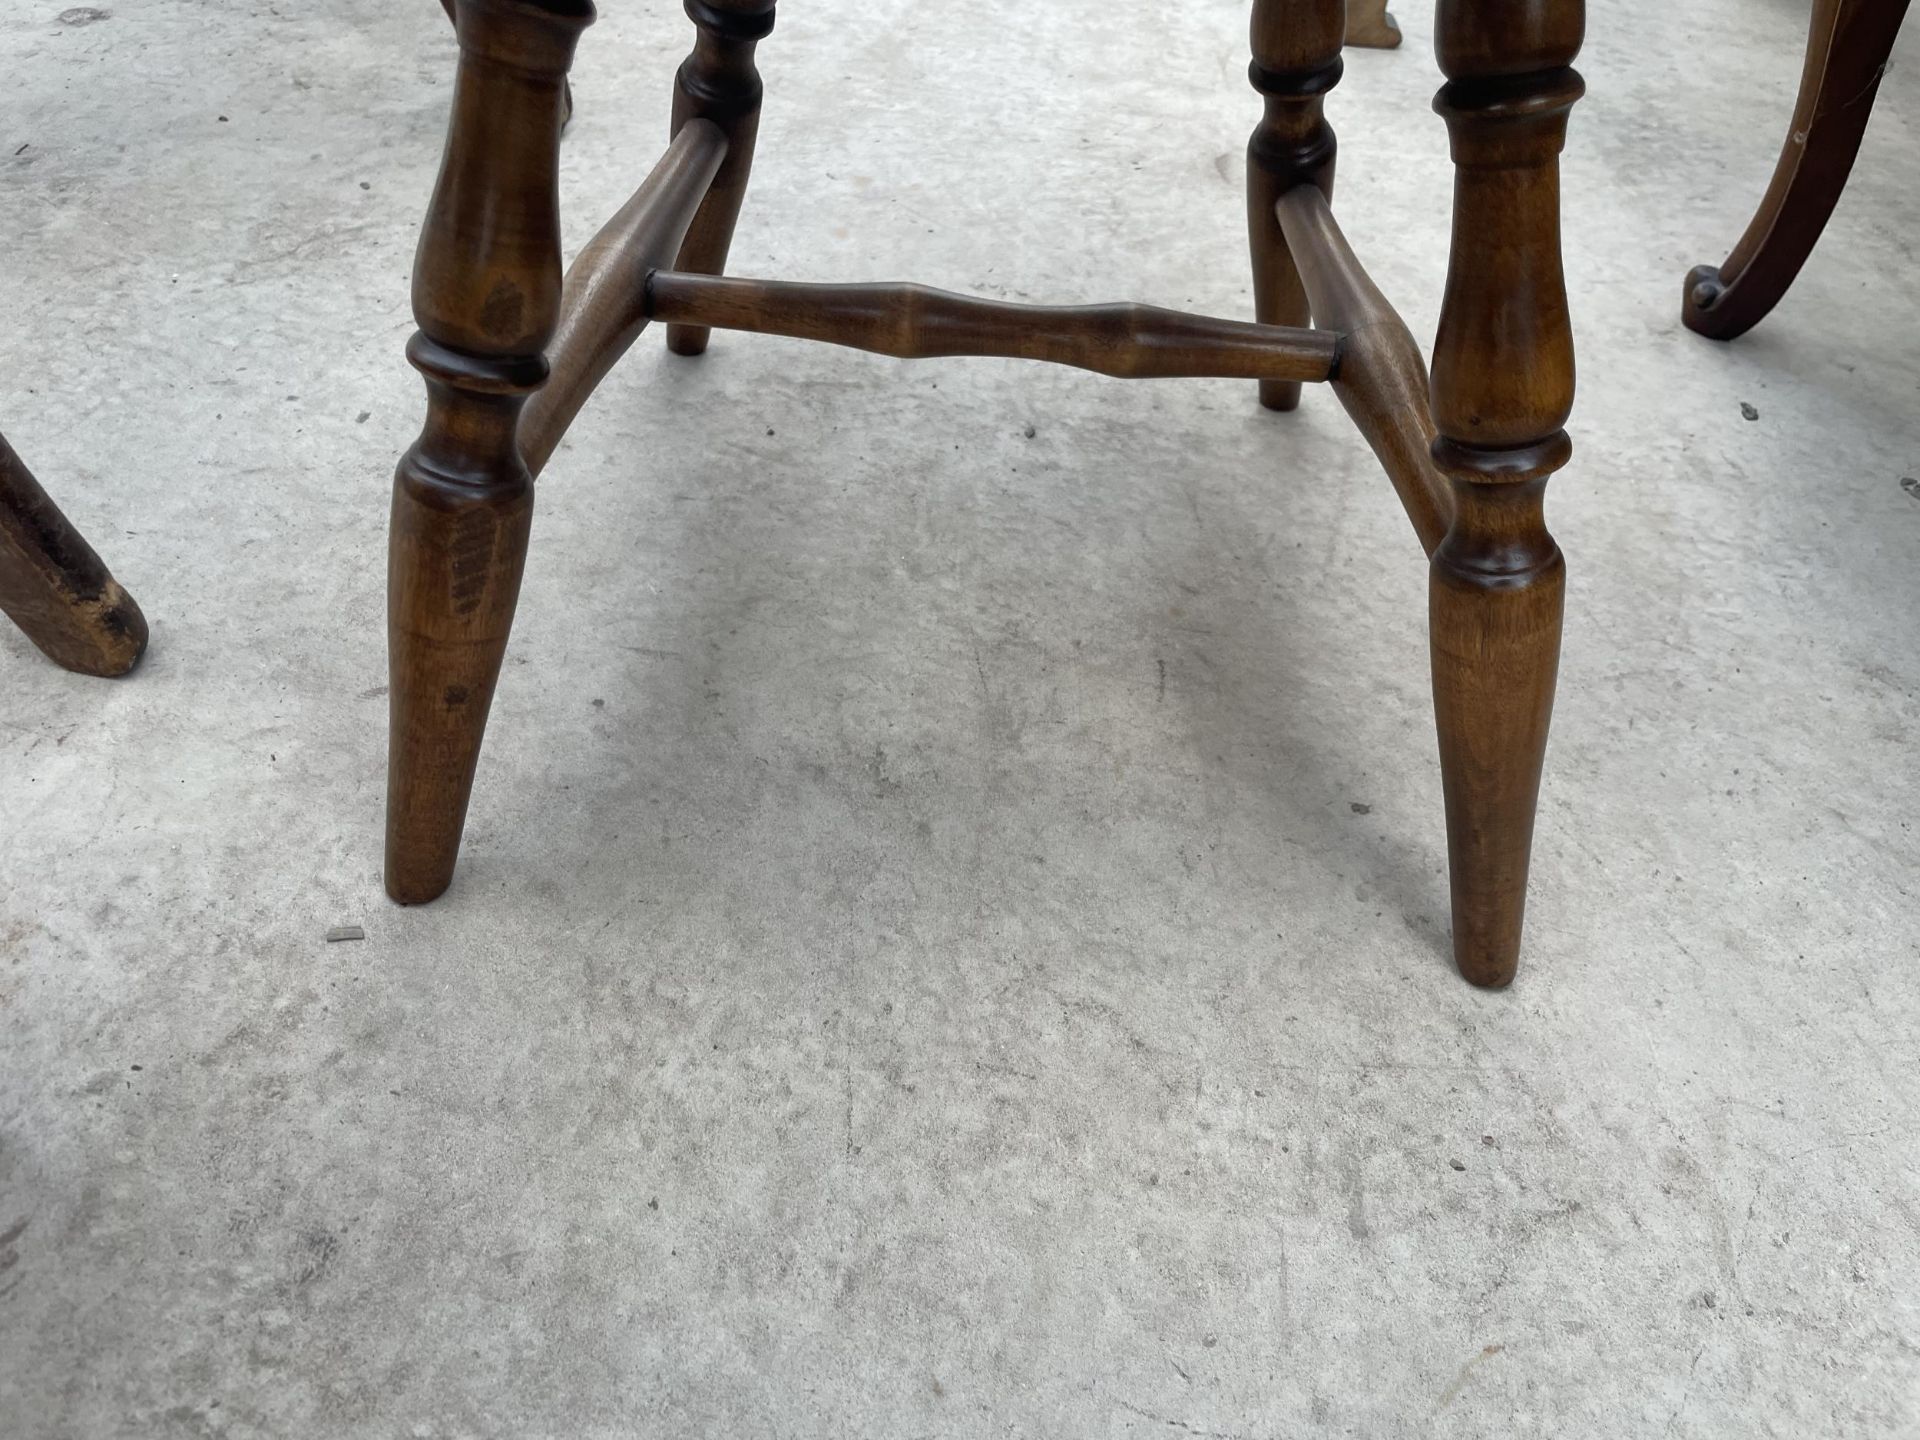 A VICTORIAN STYLE CHILDS ELBOW CHAIR BEARING 'IBEX' LABEL AND VICTORIAN PARLOUR CHAIR - Image 4 of 4